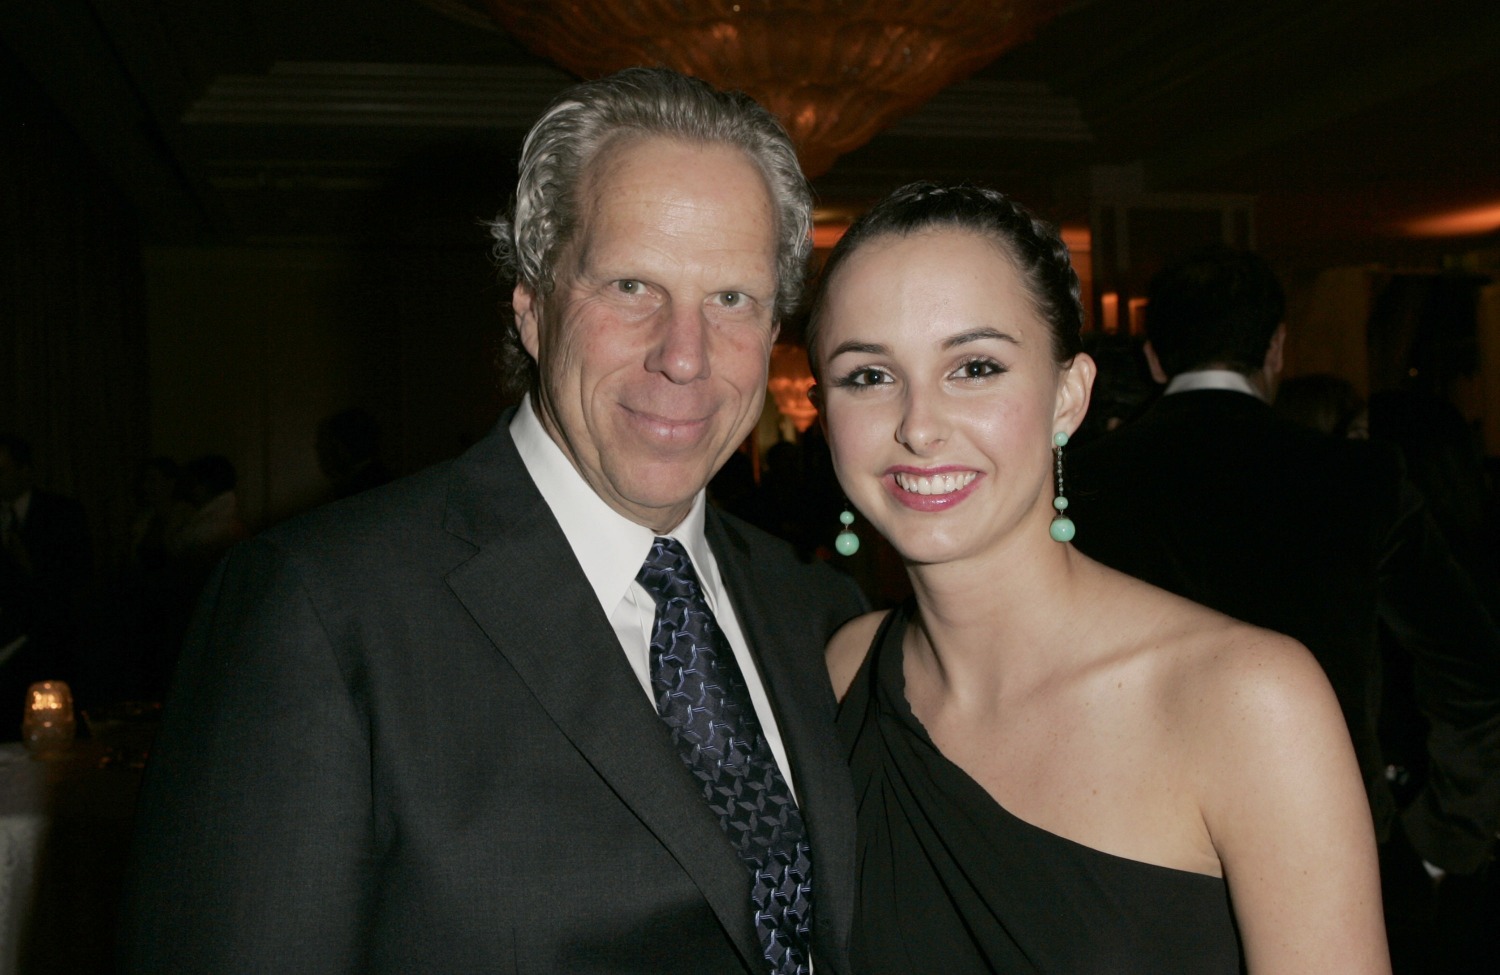 Giants co-owner Steve Tisch suffered a devastating loss with the tragic death of his daughter Hilary Tisch.